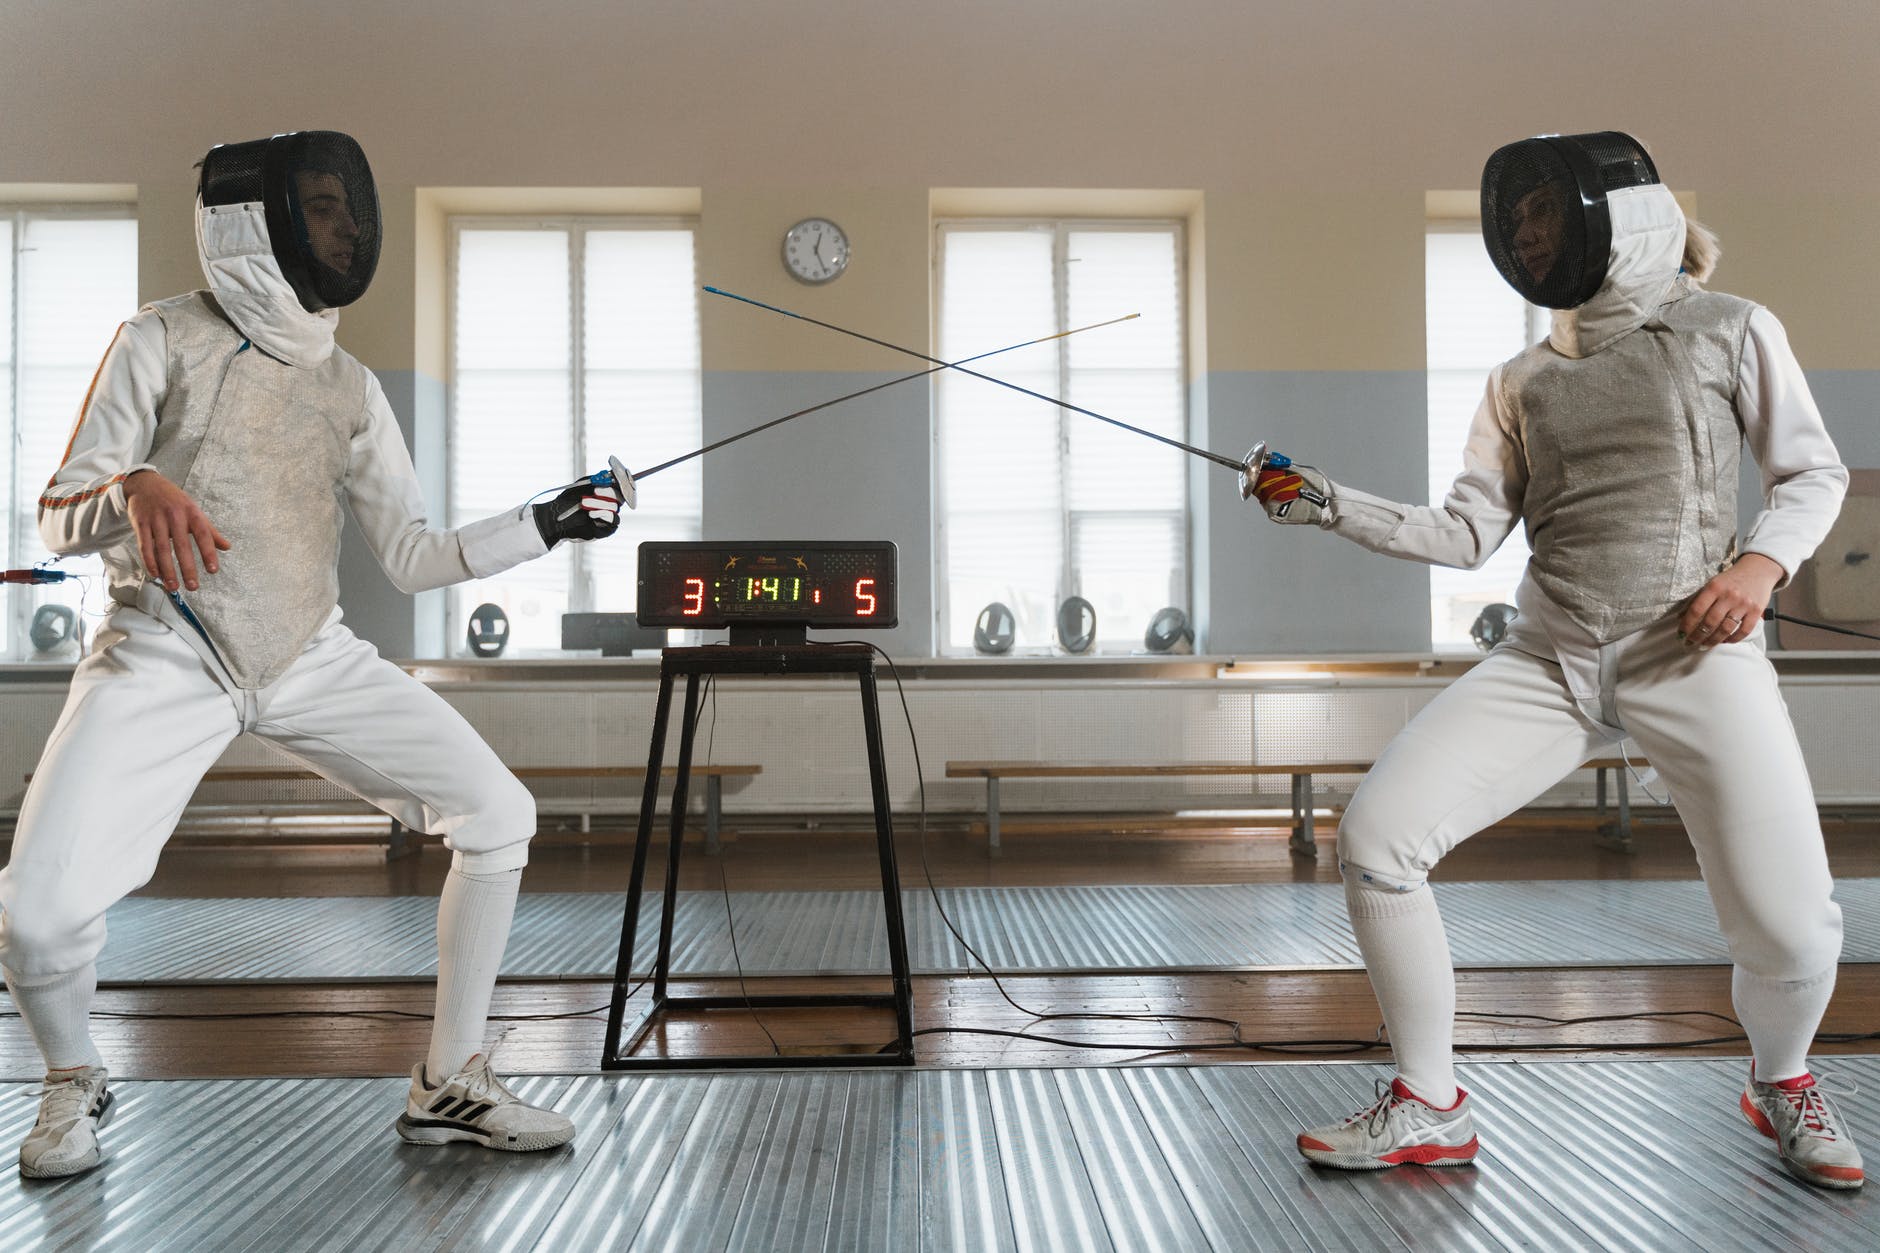 fencers in their fighting stance